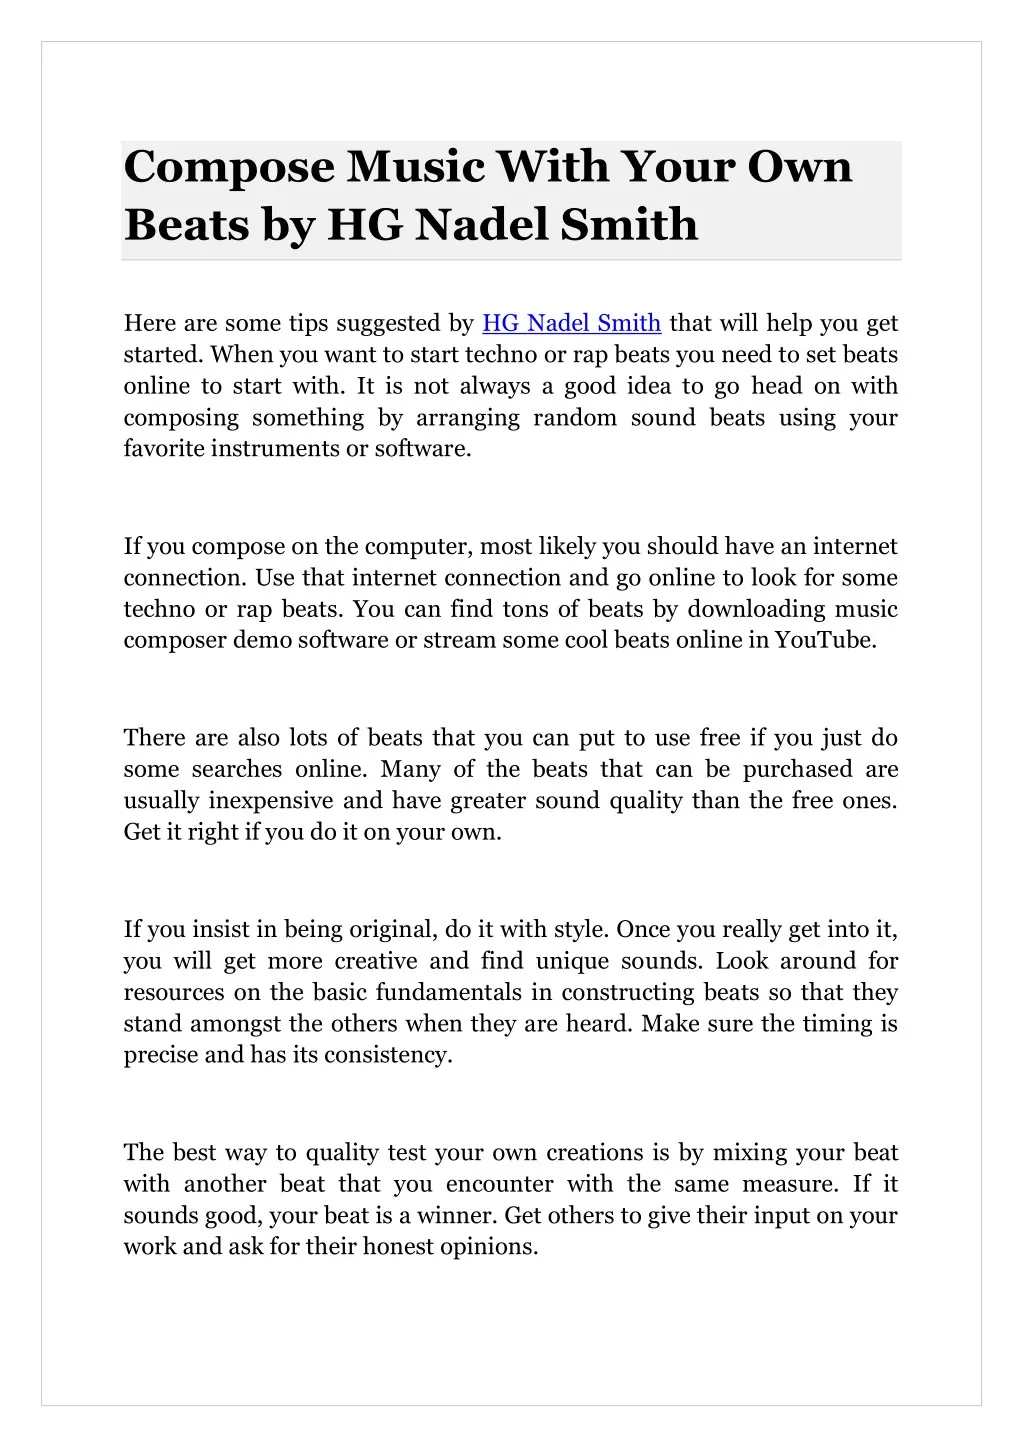 compose music with your own beats by hg nadel